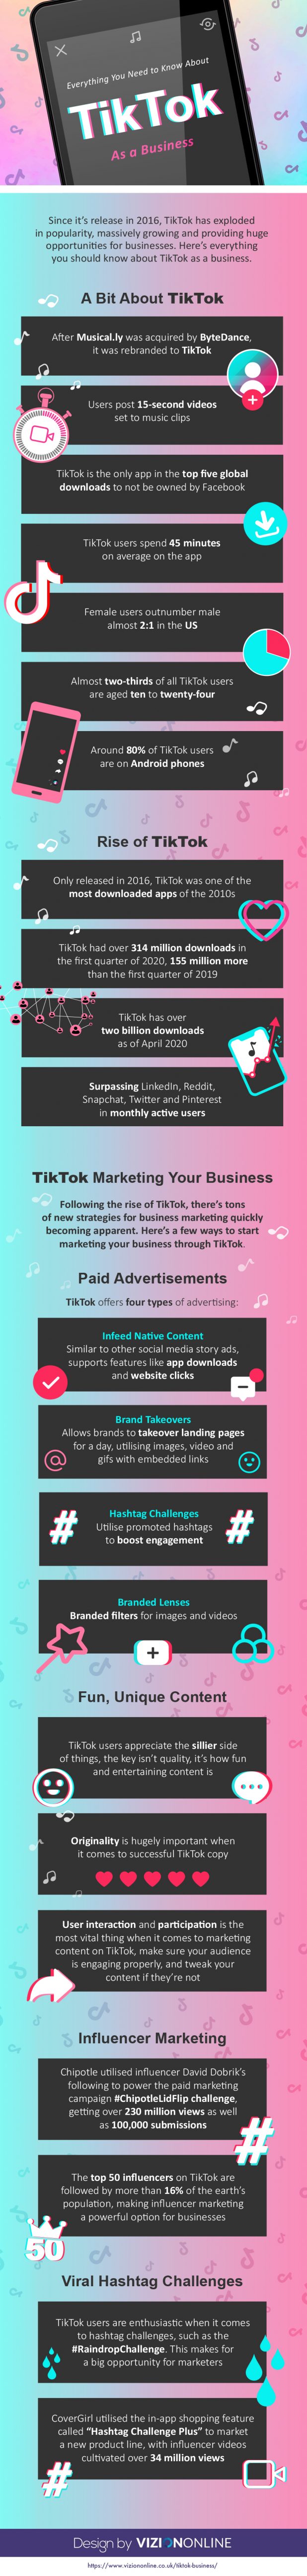 TikTok Marketing: Tips and Stats for 2020 [Infographic]
